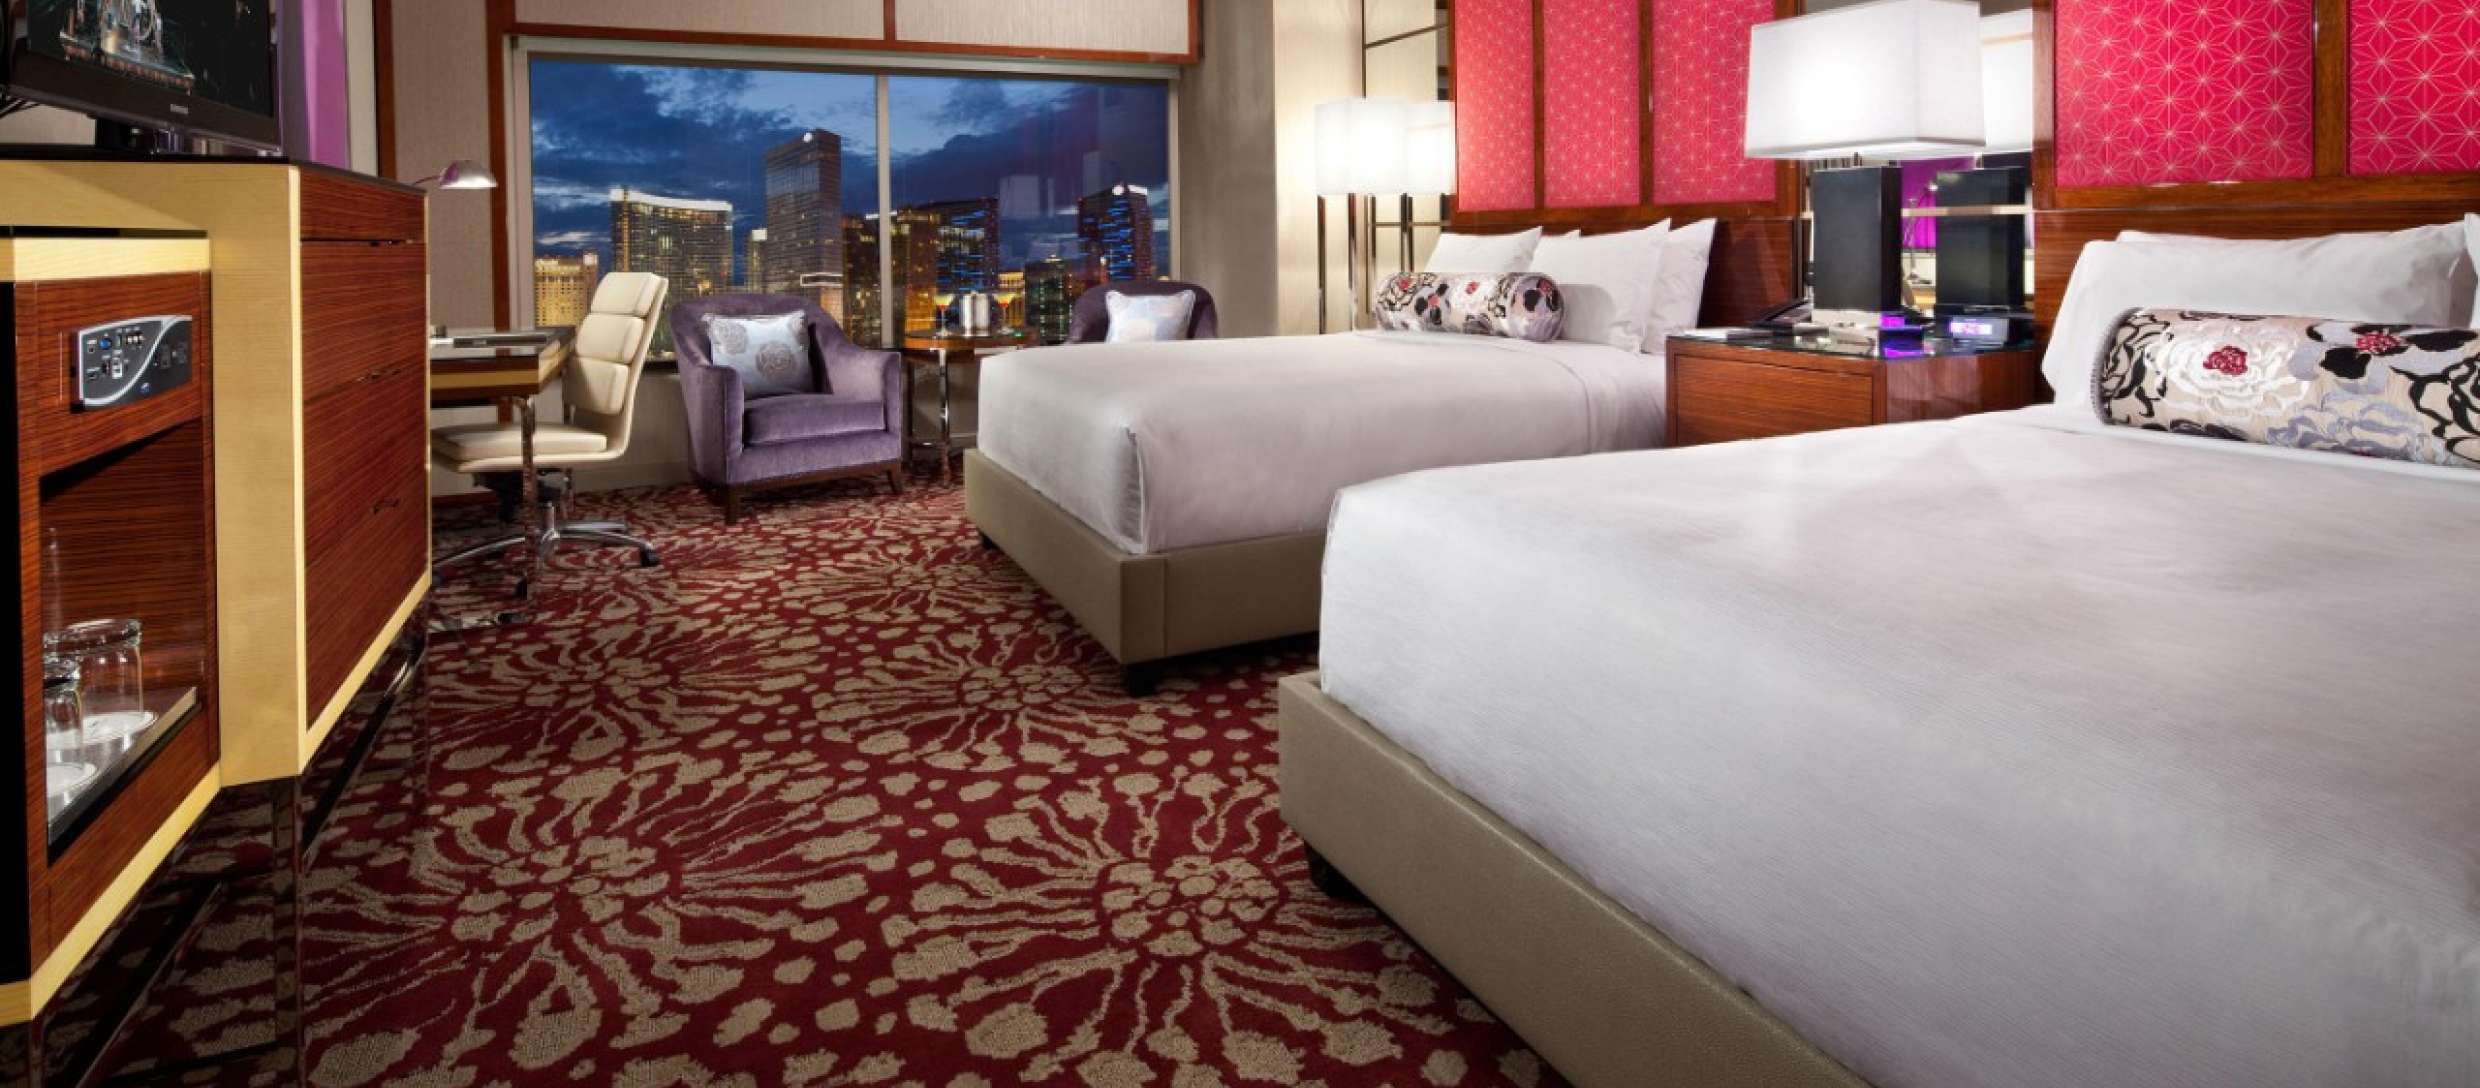 mgm-grand-hotel-rooms-grand-queen-bedroom-city-view-@2x.jpg.image.2480.1088.high